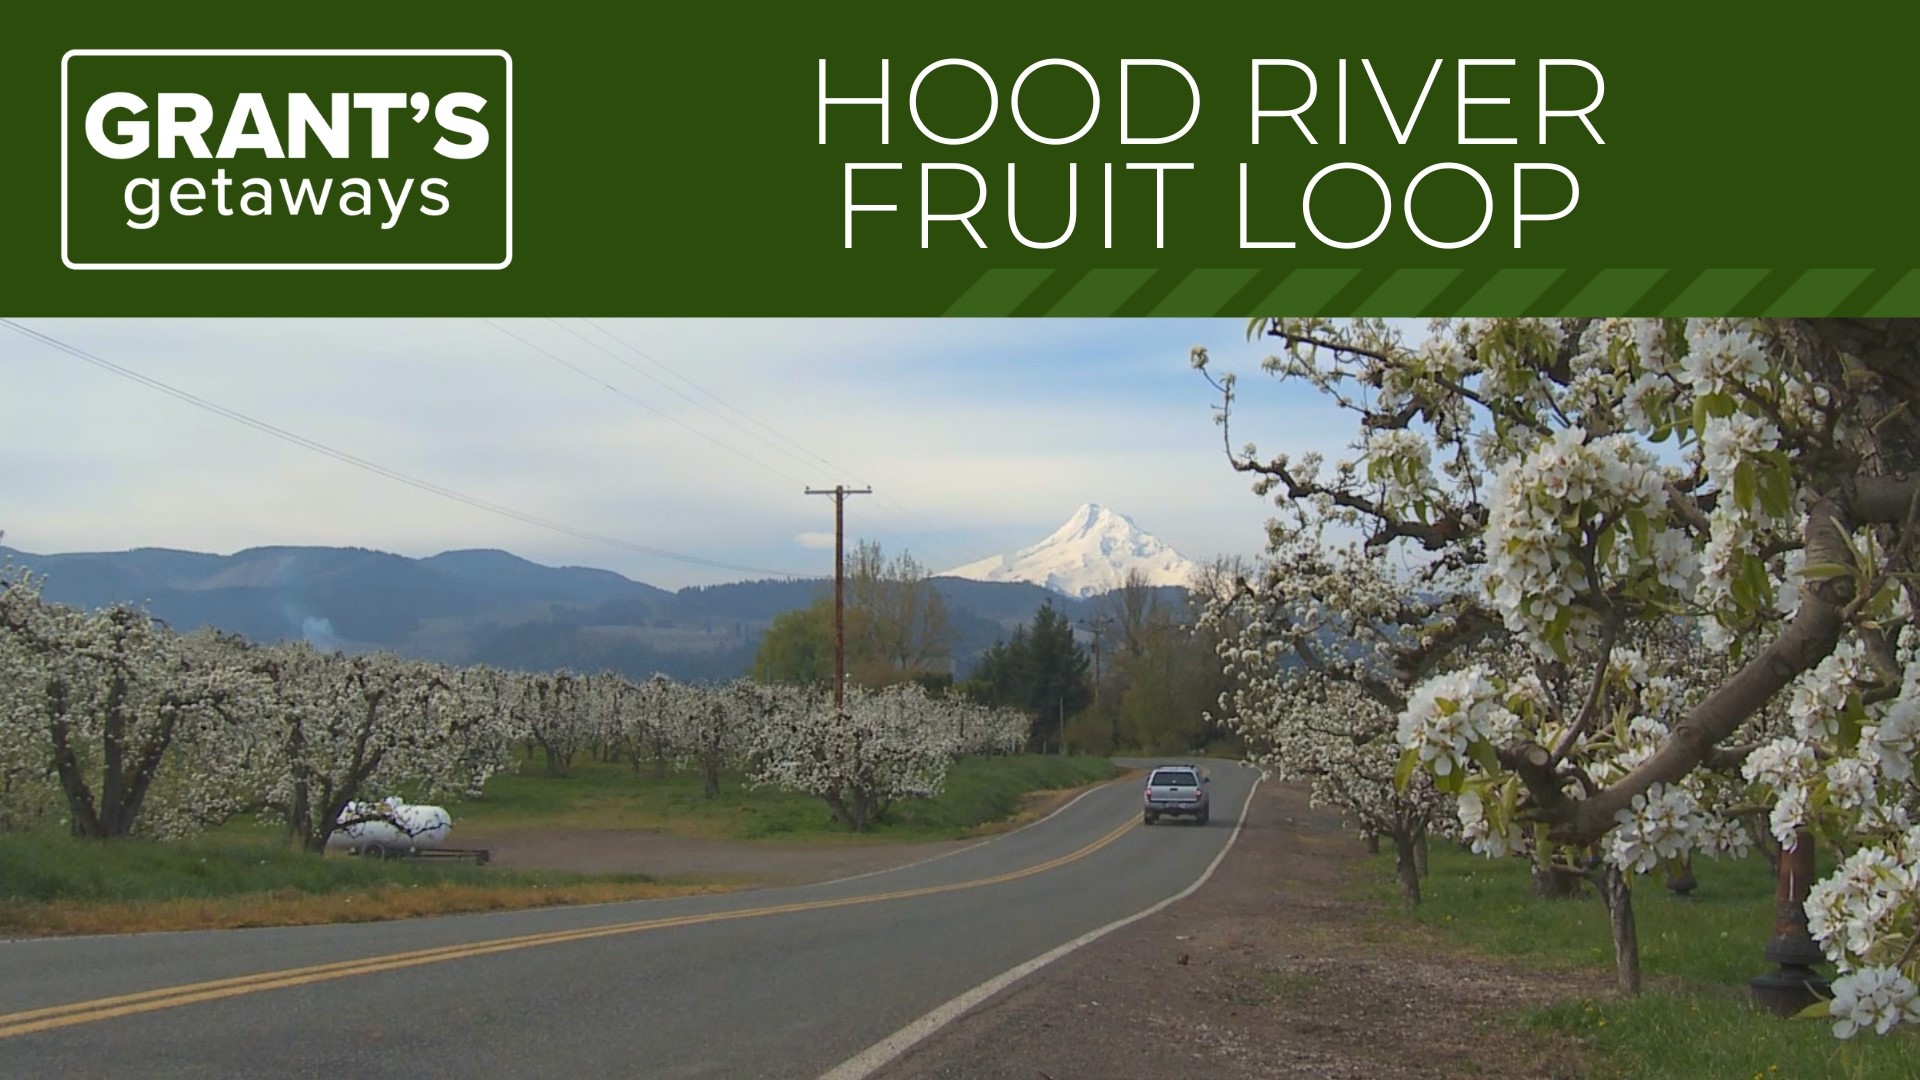 Along the valley‘s famous “Fruit Loop,” you can experience an endless wash of blossoms from pear and apple orchards.